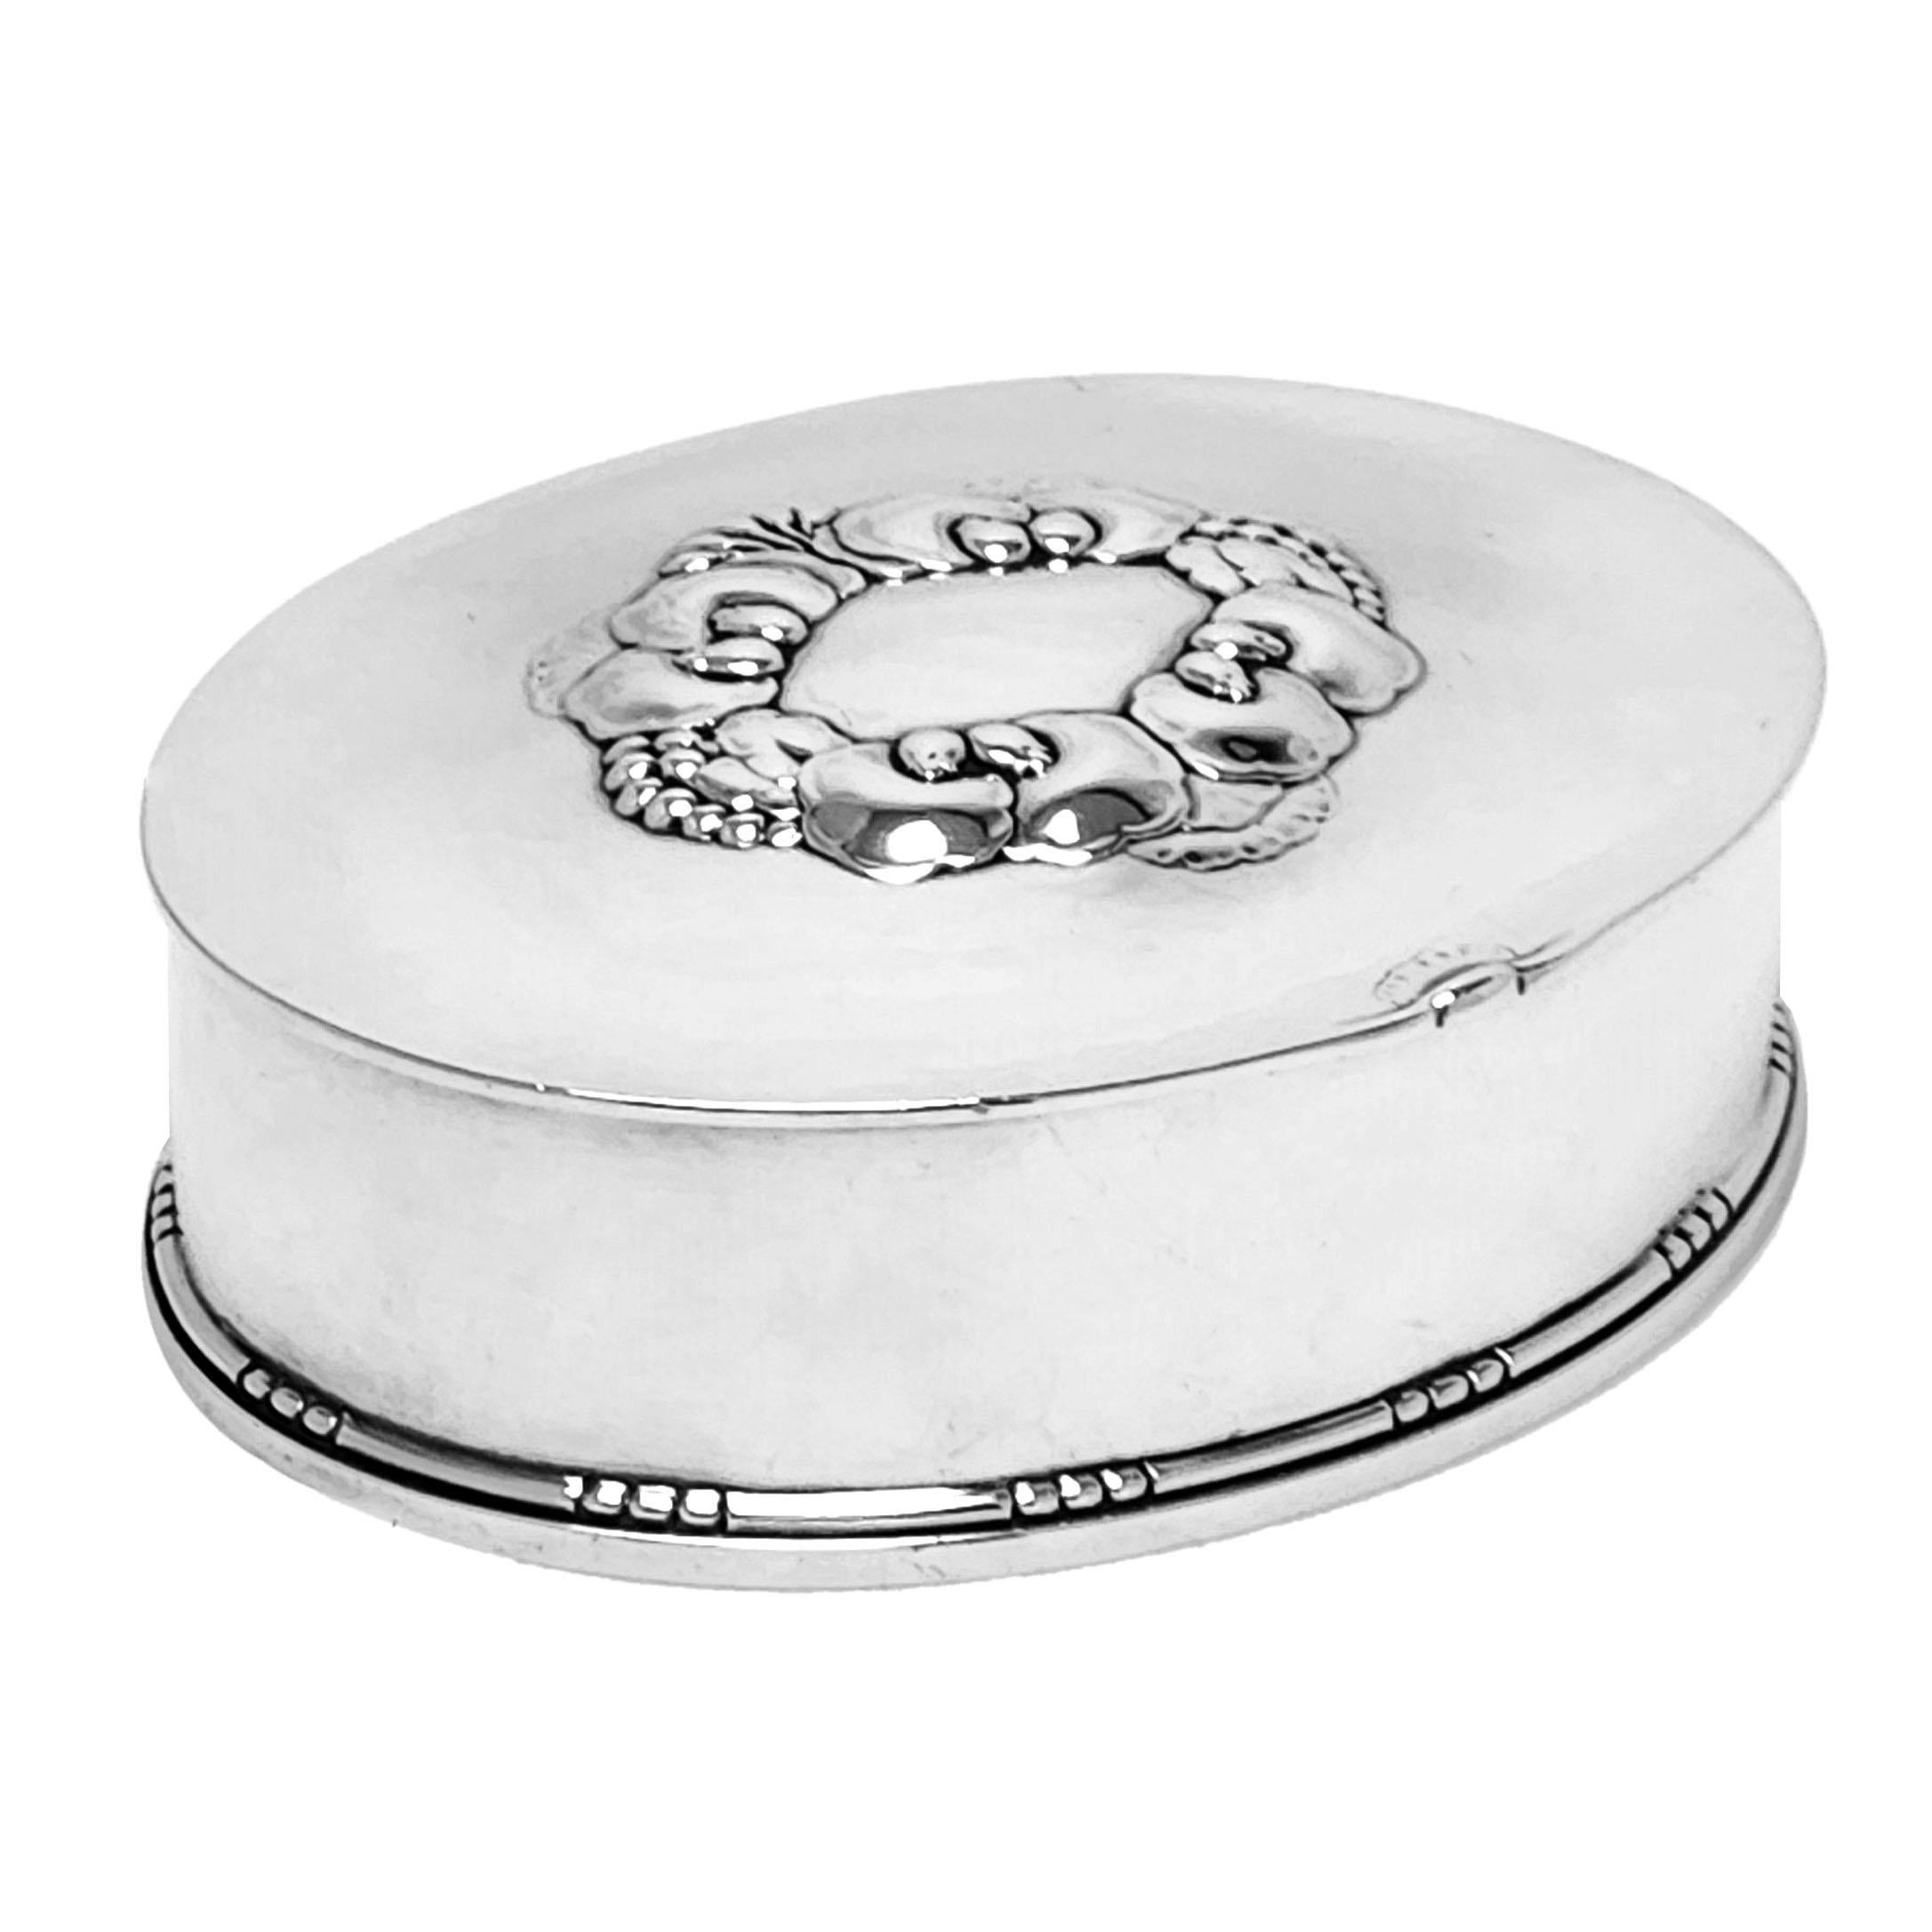 A beautiful vintage Georg Jensen silver box with an oval shape. The Lid of the Box has a stylised floral cartouche and features a subtly hammered finish. The base of the box is decorated with an understated bead border. 

The Box is Georg Jensen